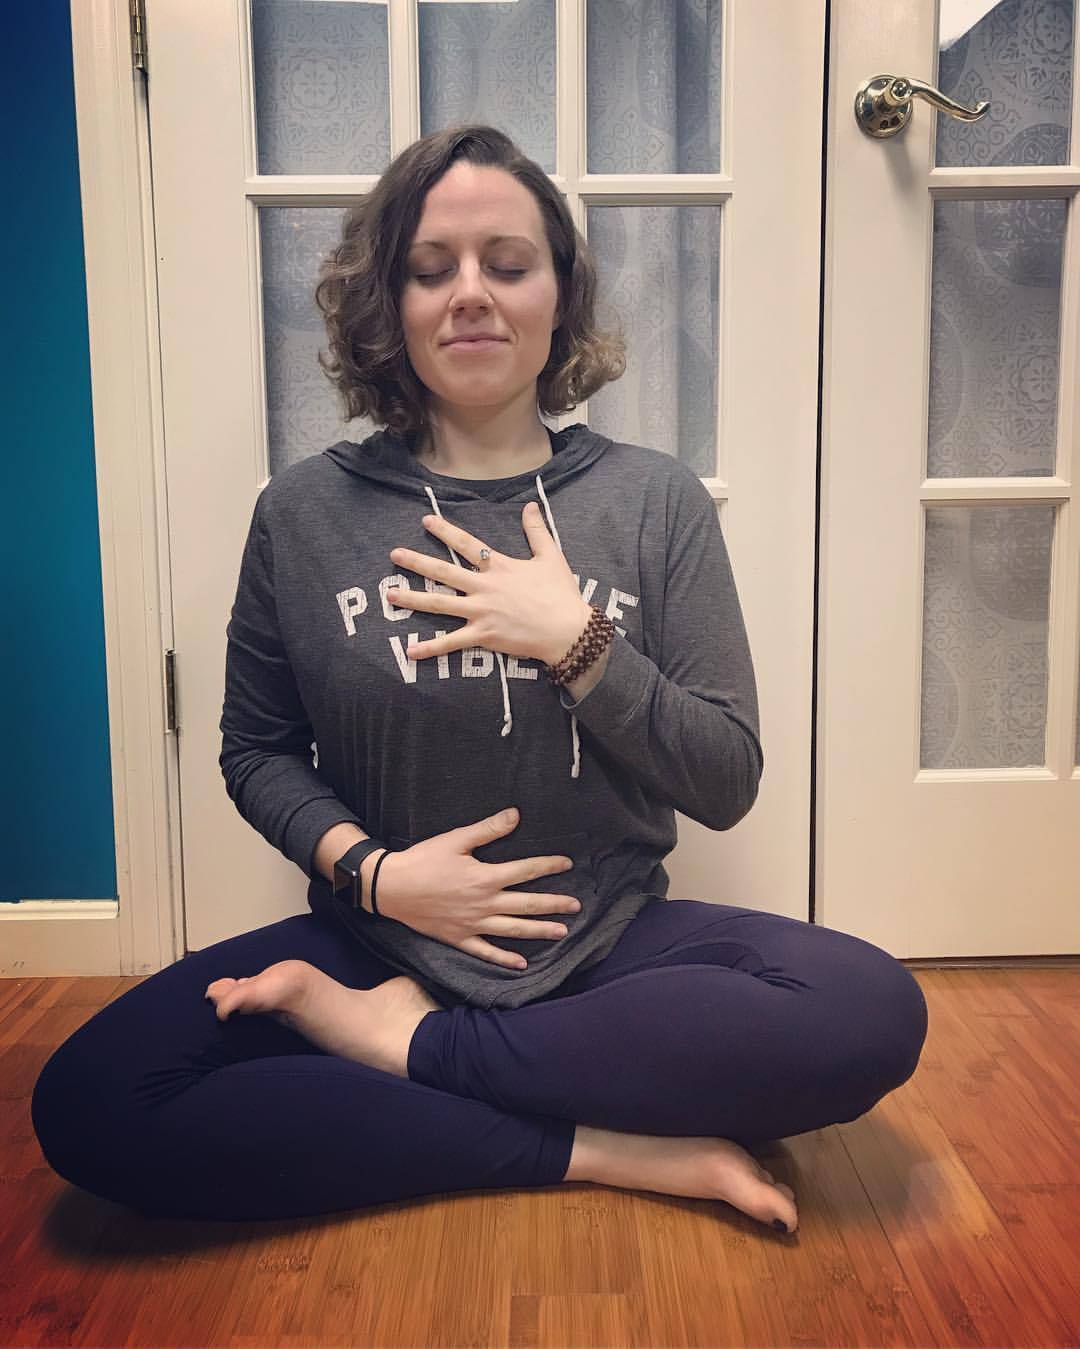 Tonight, I tried my first ever yin class with @cin_glen. No less than four people said they were surprised to see me there since I tend to move at a much higher frequency. And itâs trueâslowing down is really, really hard for me. . But then an...